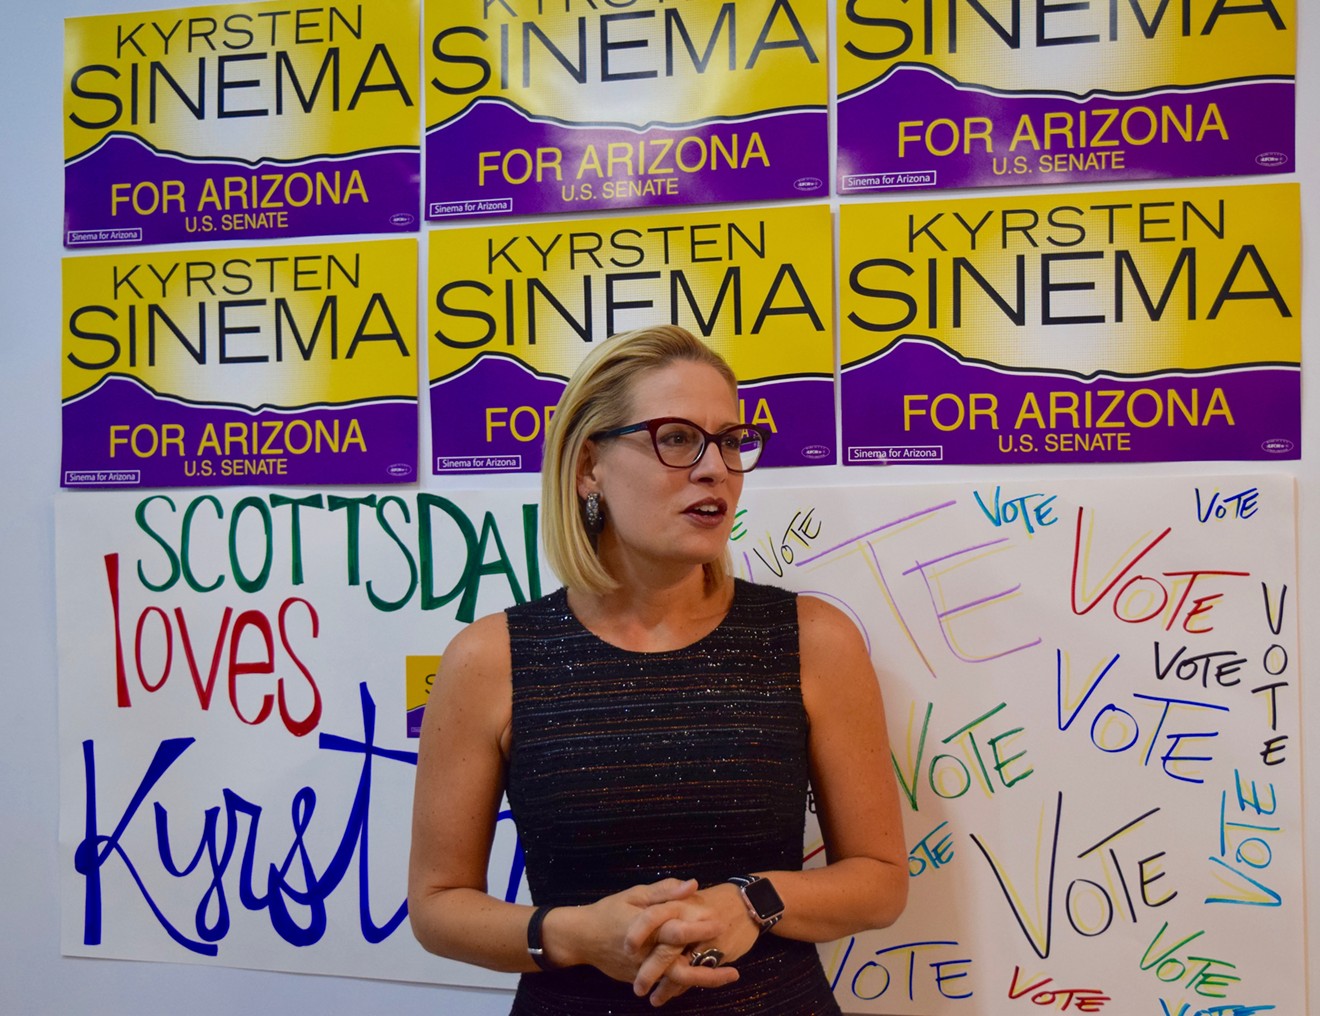 Kyrsten Sinema at a campaign event in Scottsdale on October 1. "I think an investigation is always appropriate when serious allegations of this nature have been made."